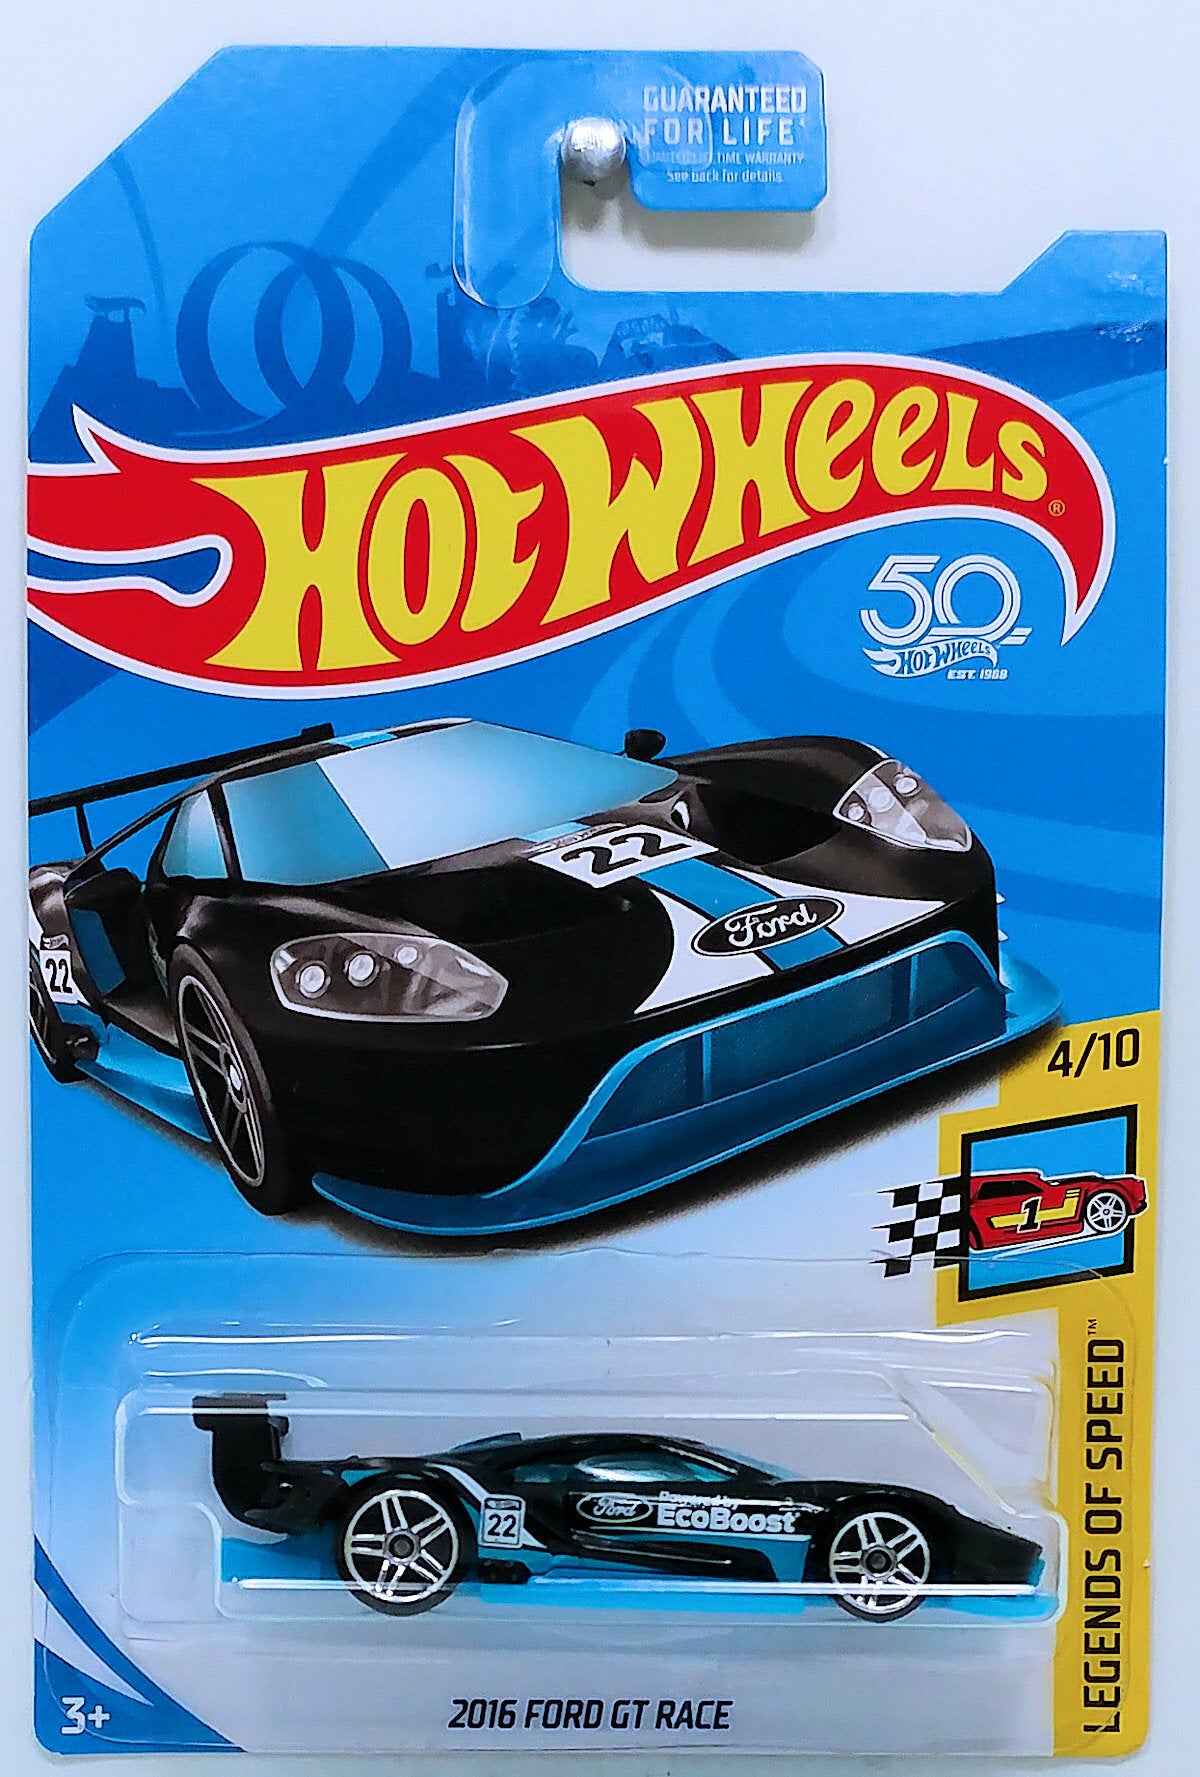 Hot Wheels 2018 - Kroger Exclusive Color - Legends of Speed 4/10 - 2016 Ford GT Race - Black - USA 50th Card